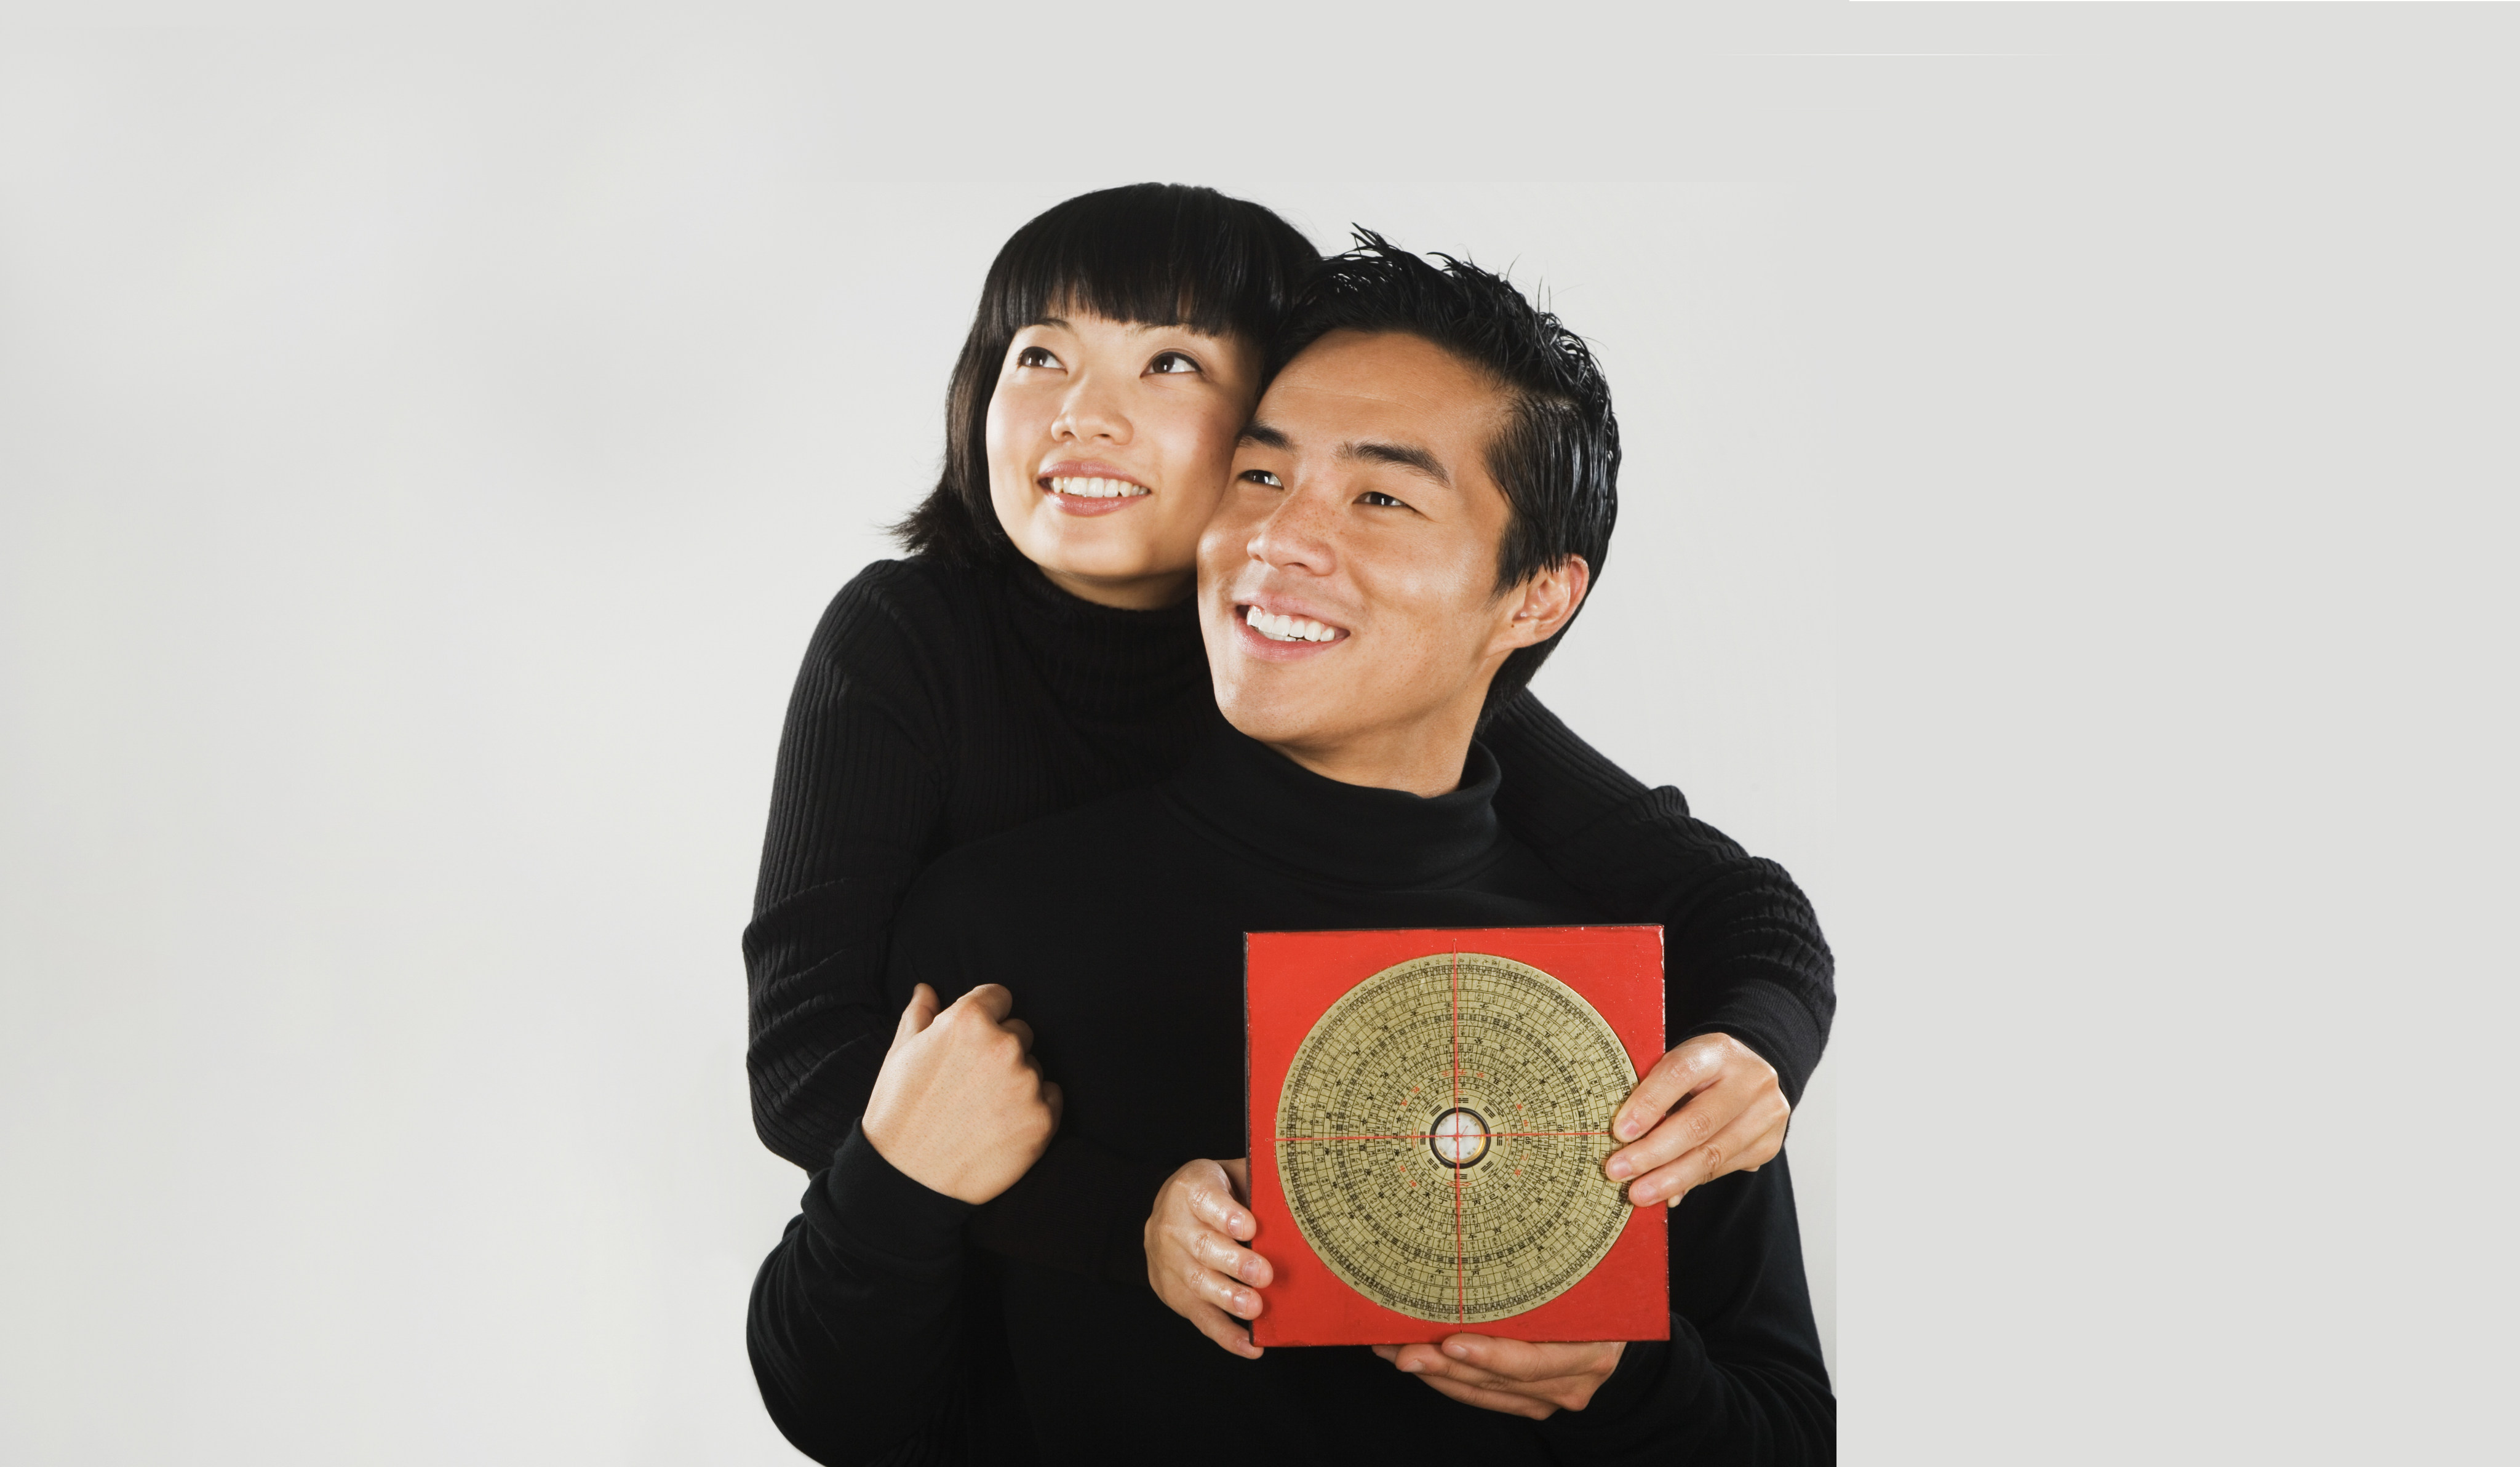 Looking for new or improved love before Valentine’s Day? These expert feng shui tips could boost your love energy. Photo: Shutterstock